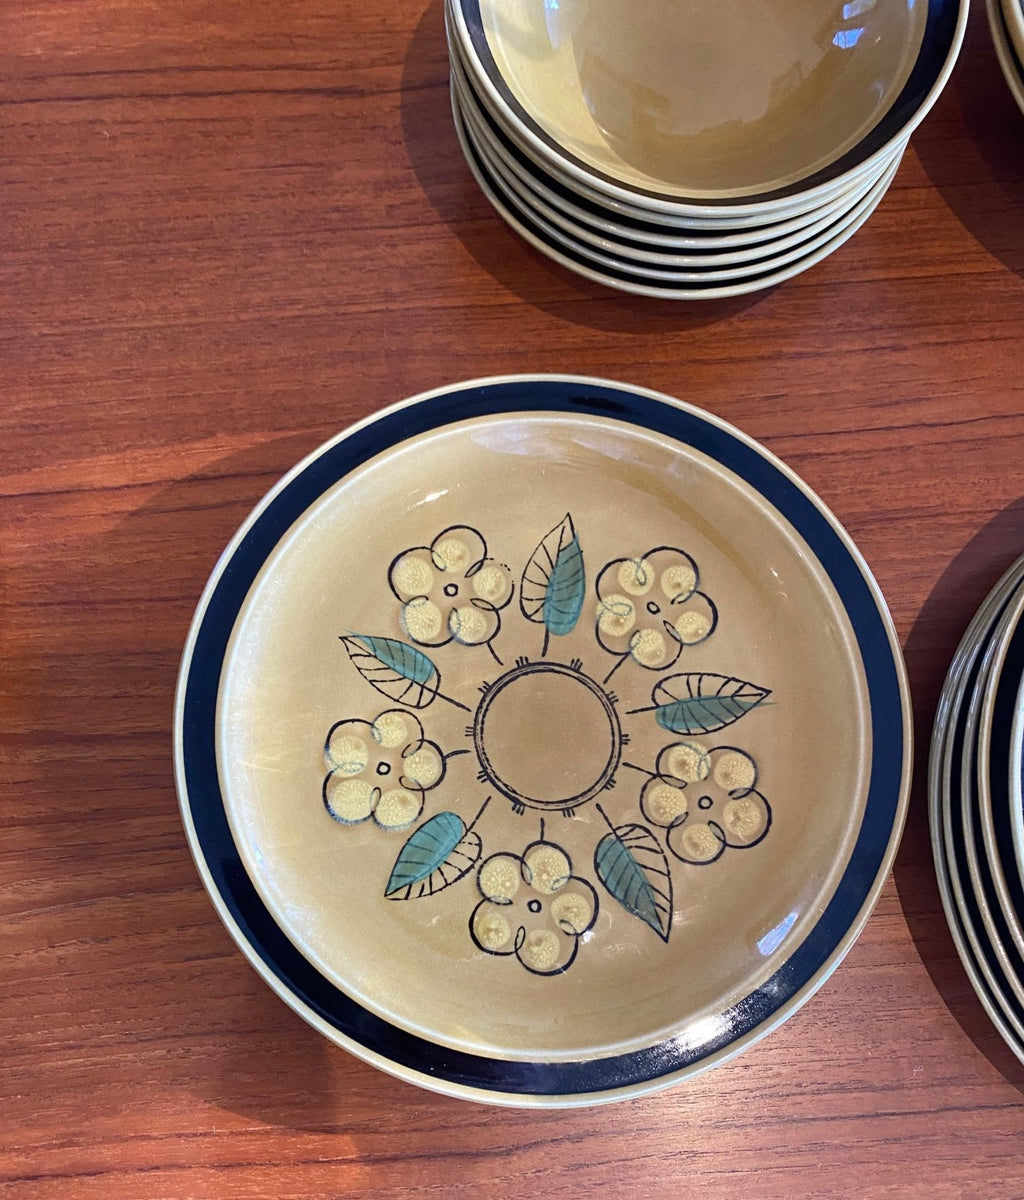 Mid-century stoneware by Crest-Stone, "Lisa" pattern with blue rim, earth tones and yellow flowers- Cook Street Vintage